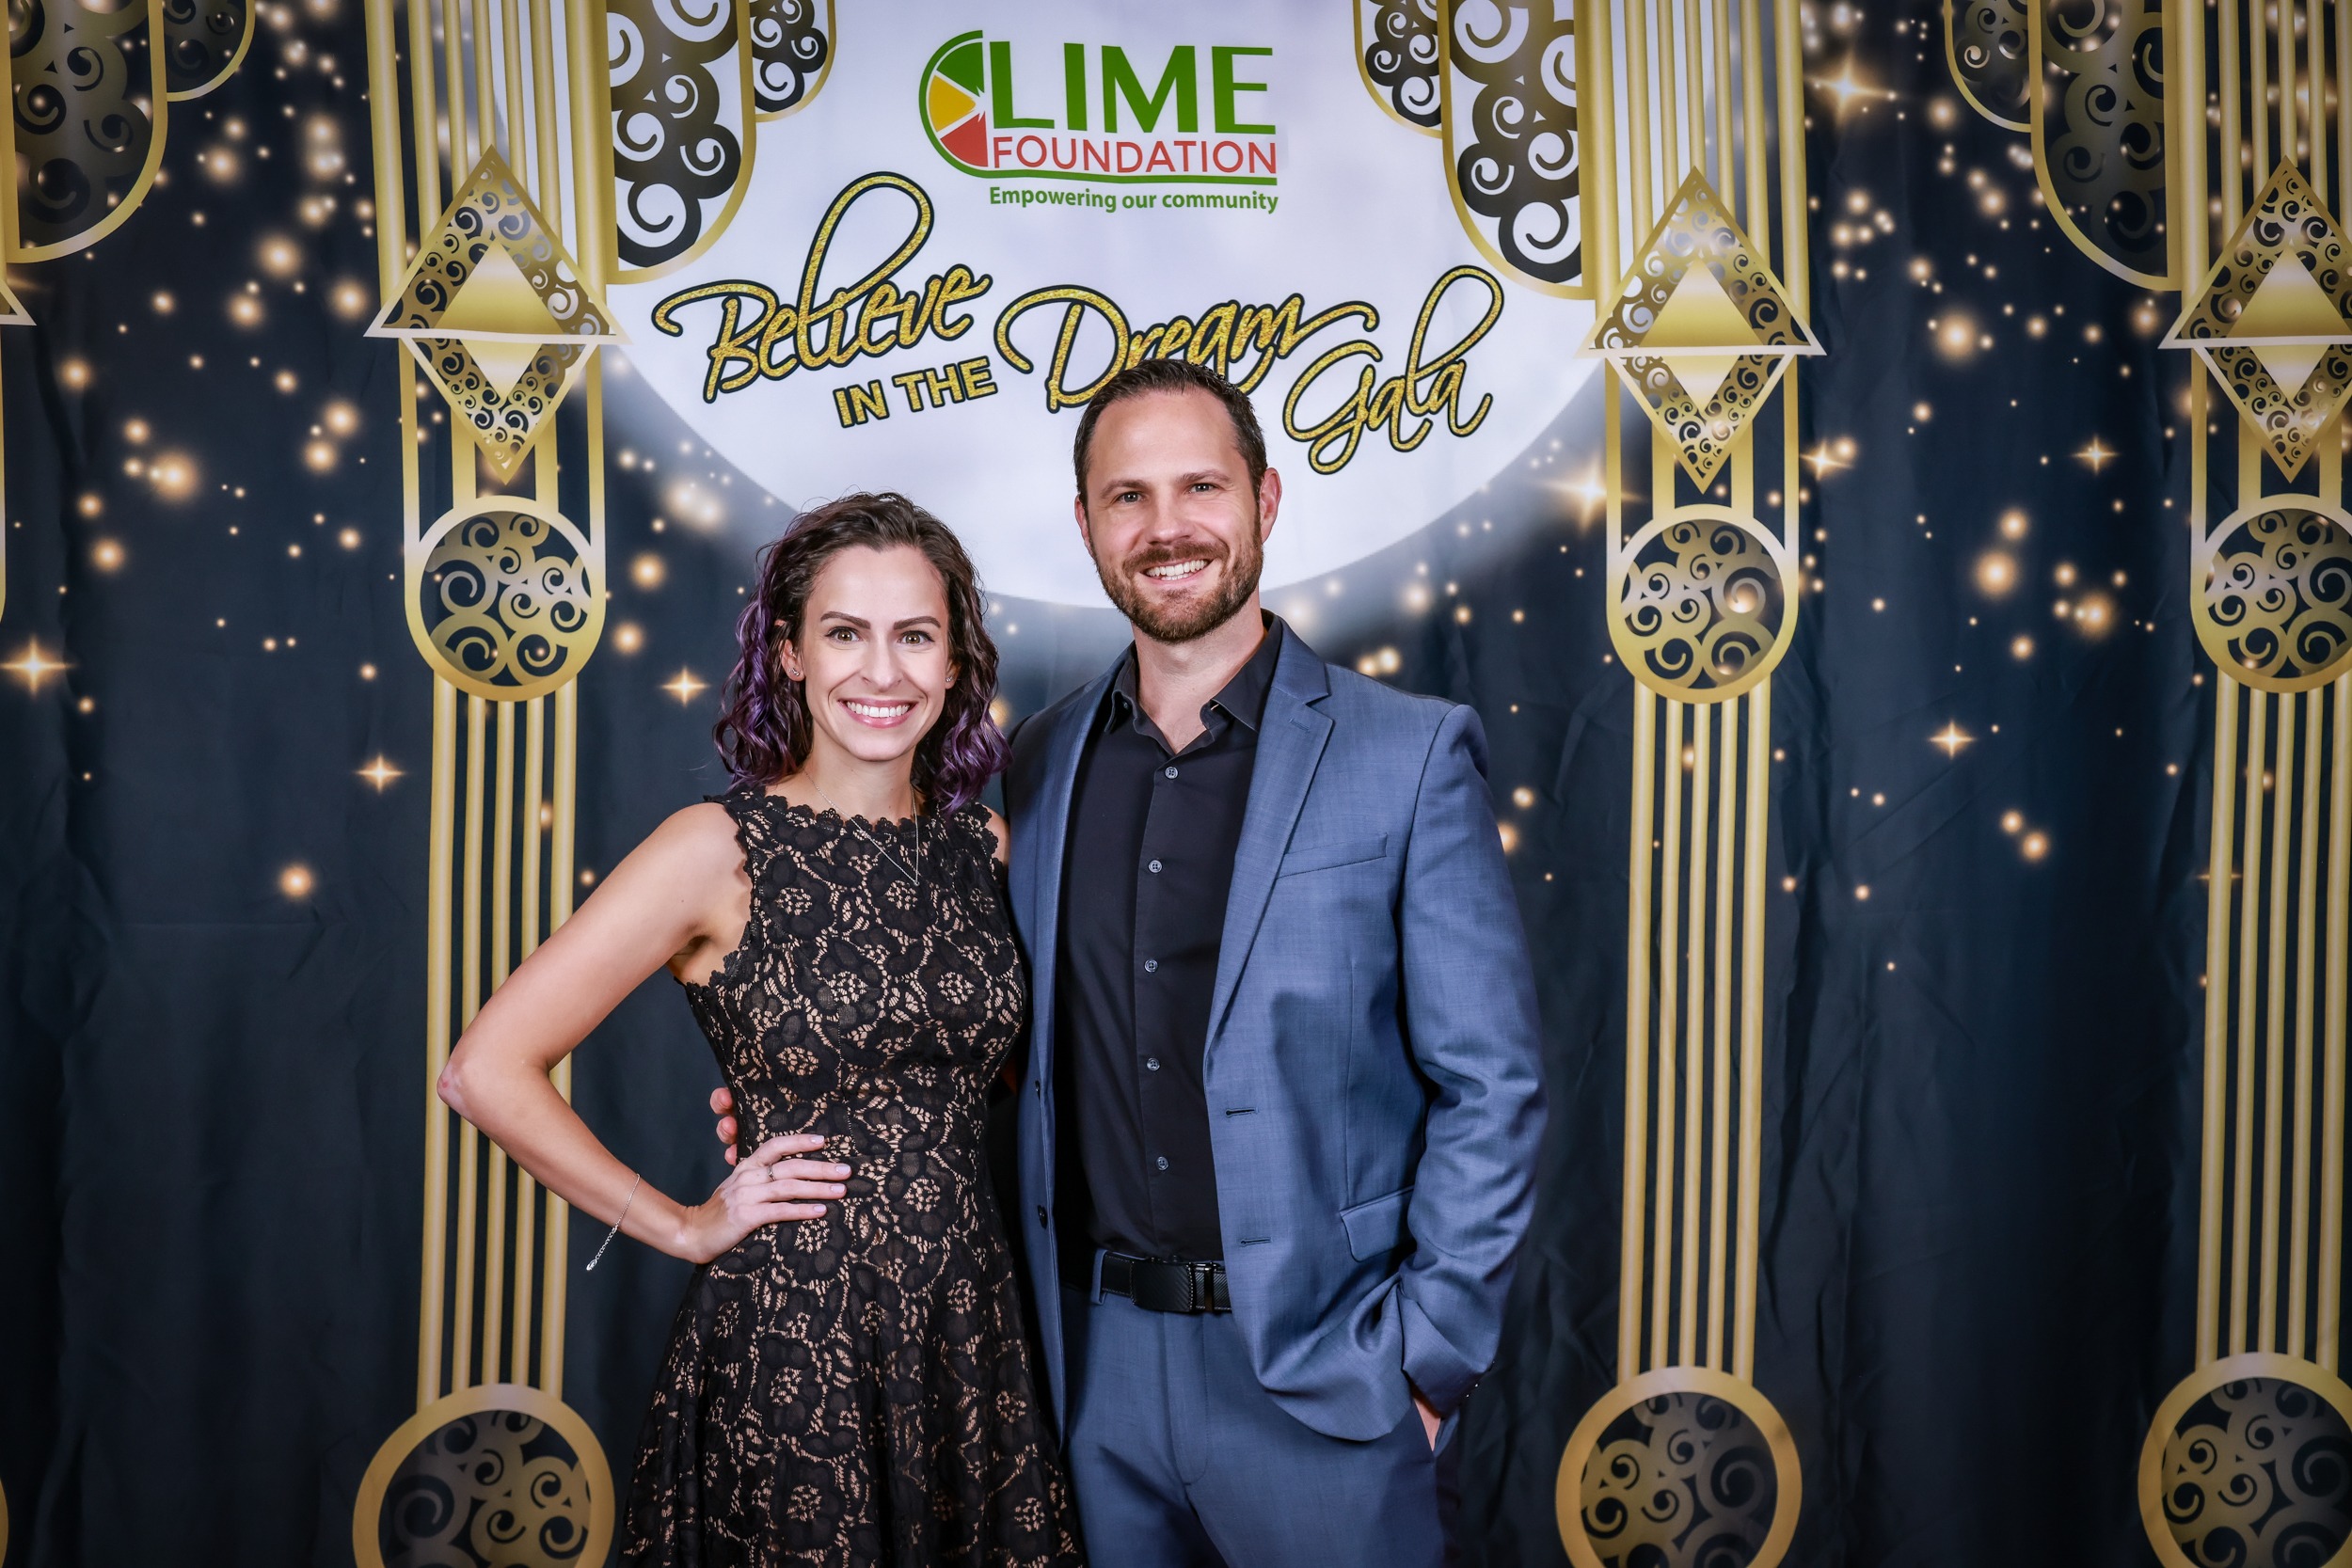 Two individuals posing for a photo in front of a gilded backdrop at The LIME Foundation of Santa Rosa.